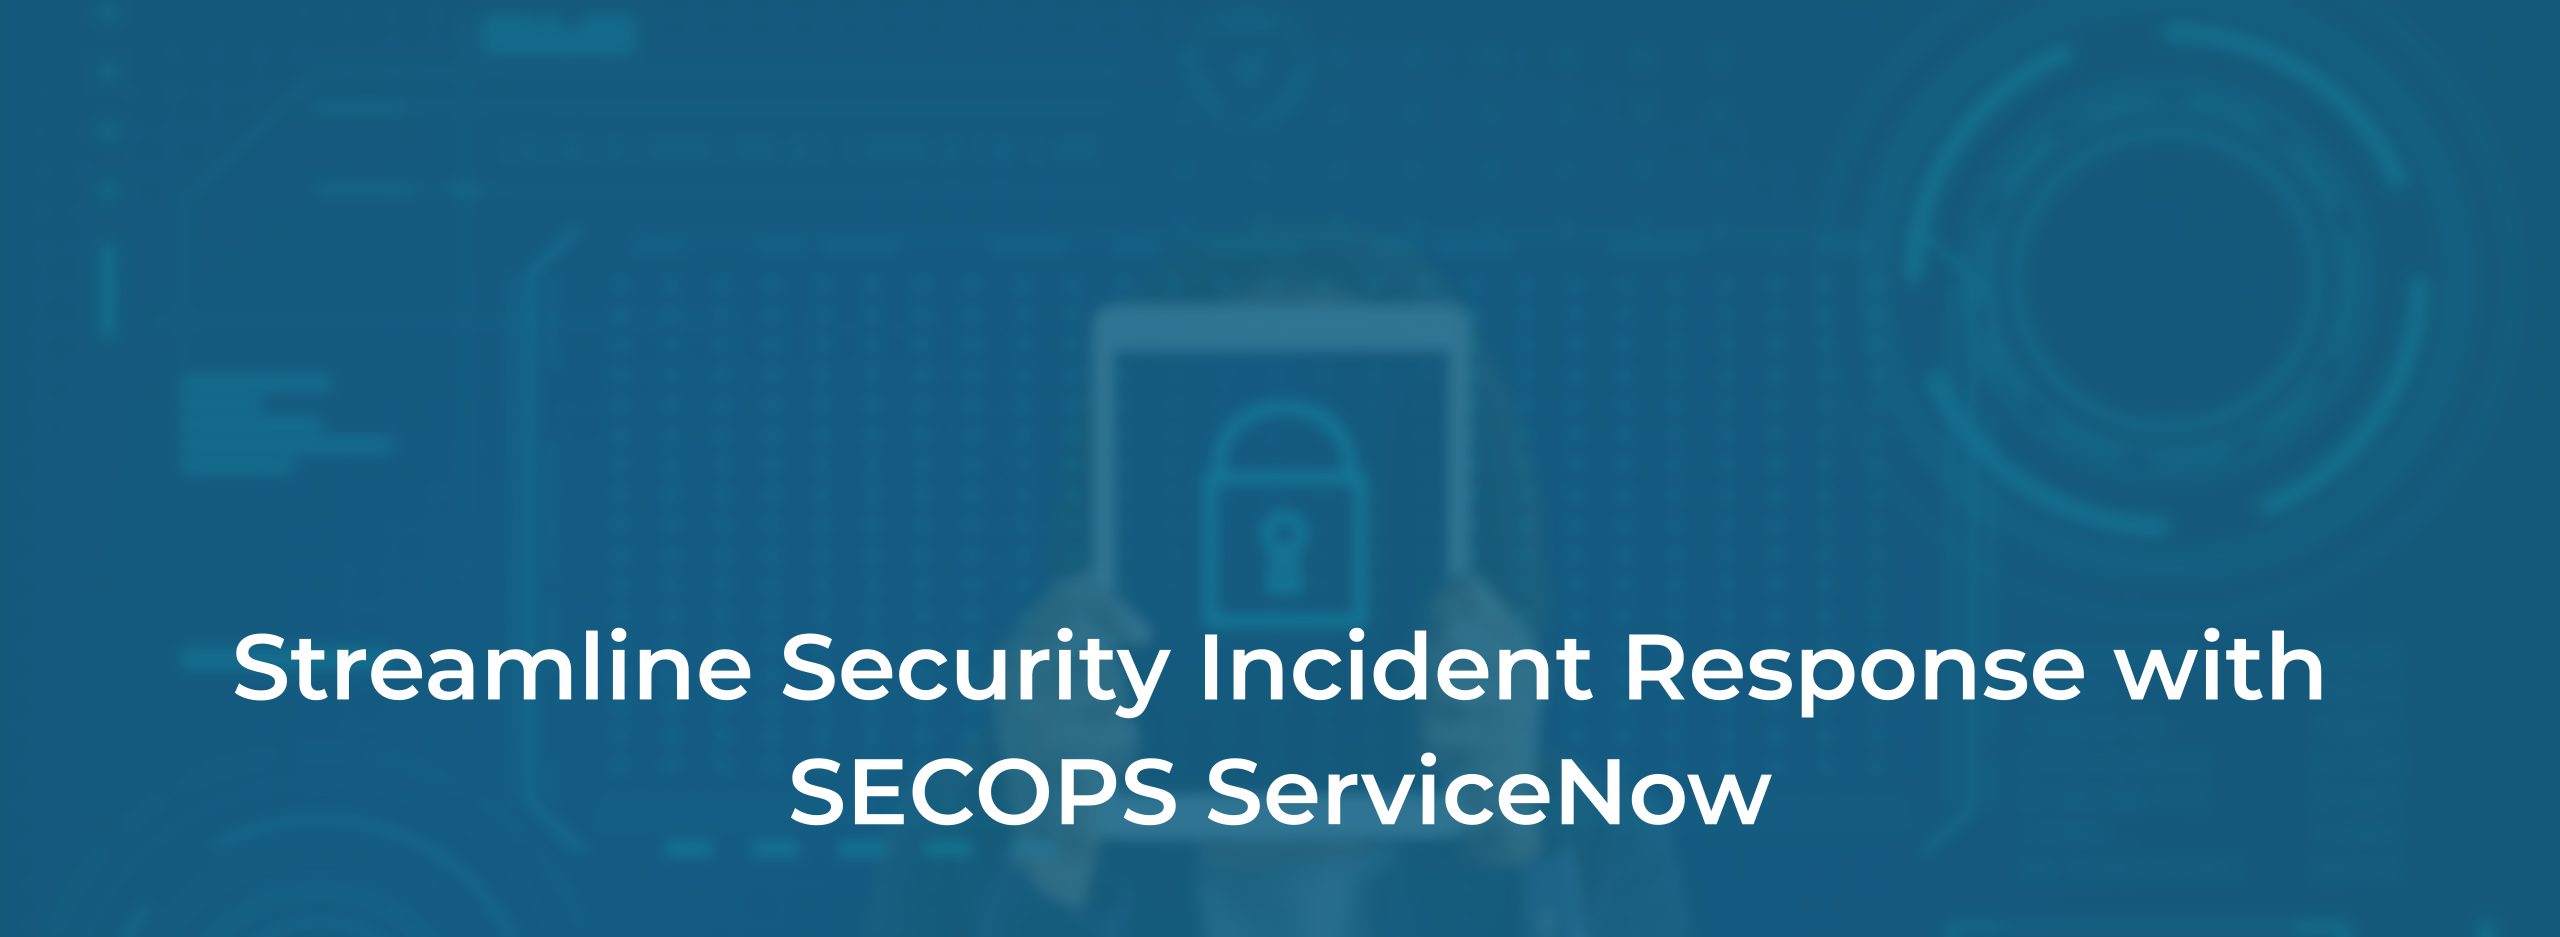 ServiceNow Security Operations